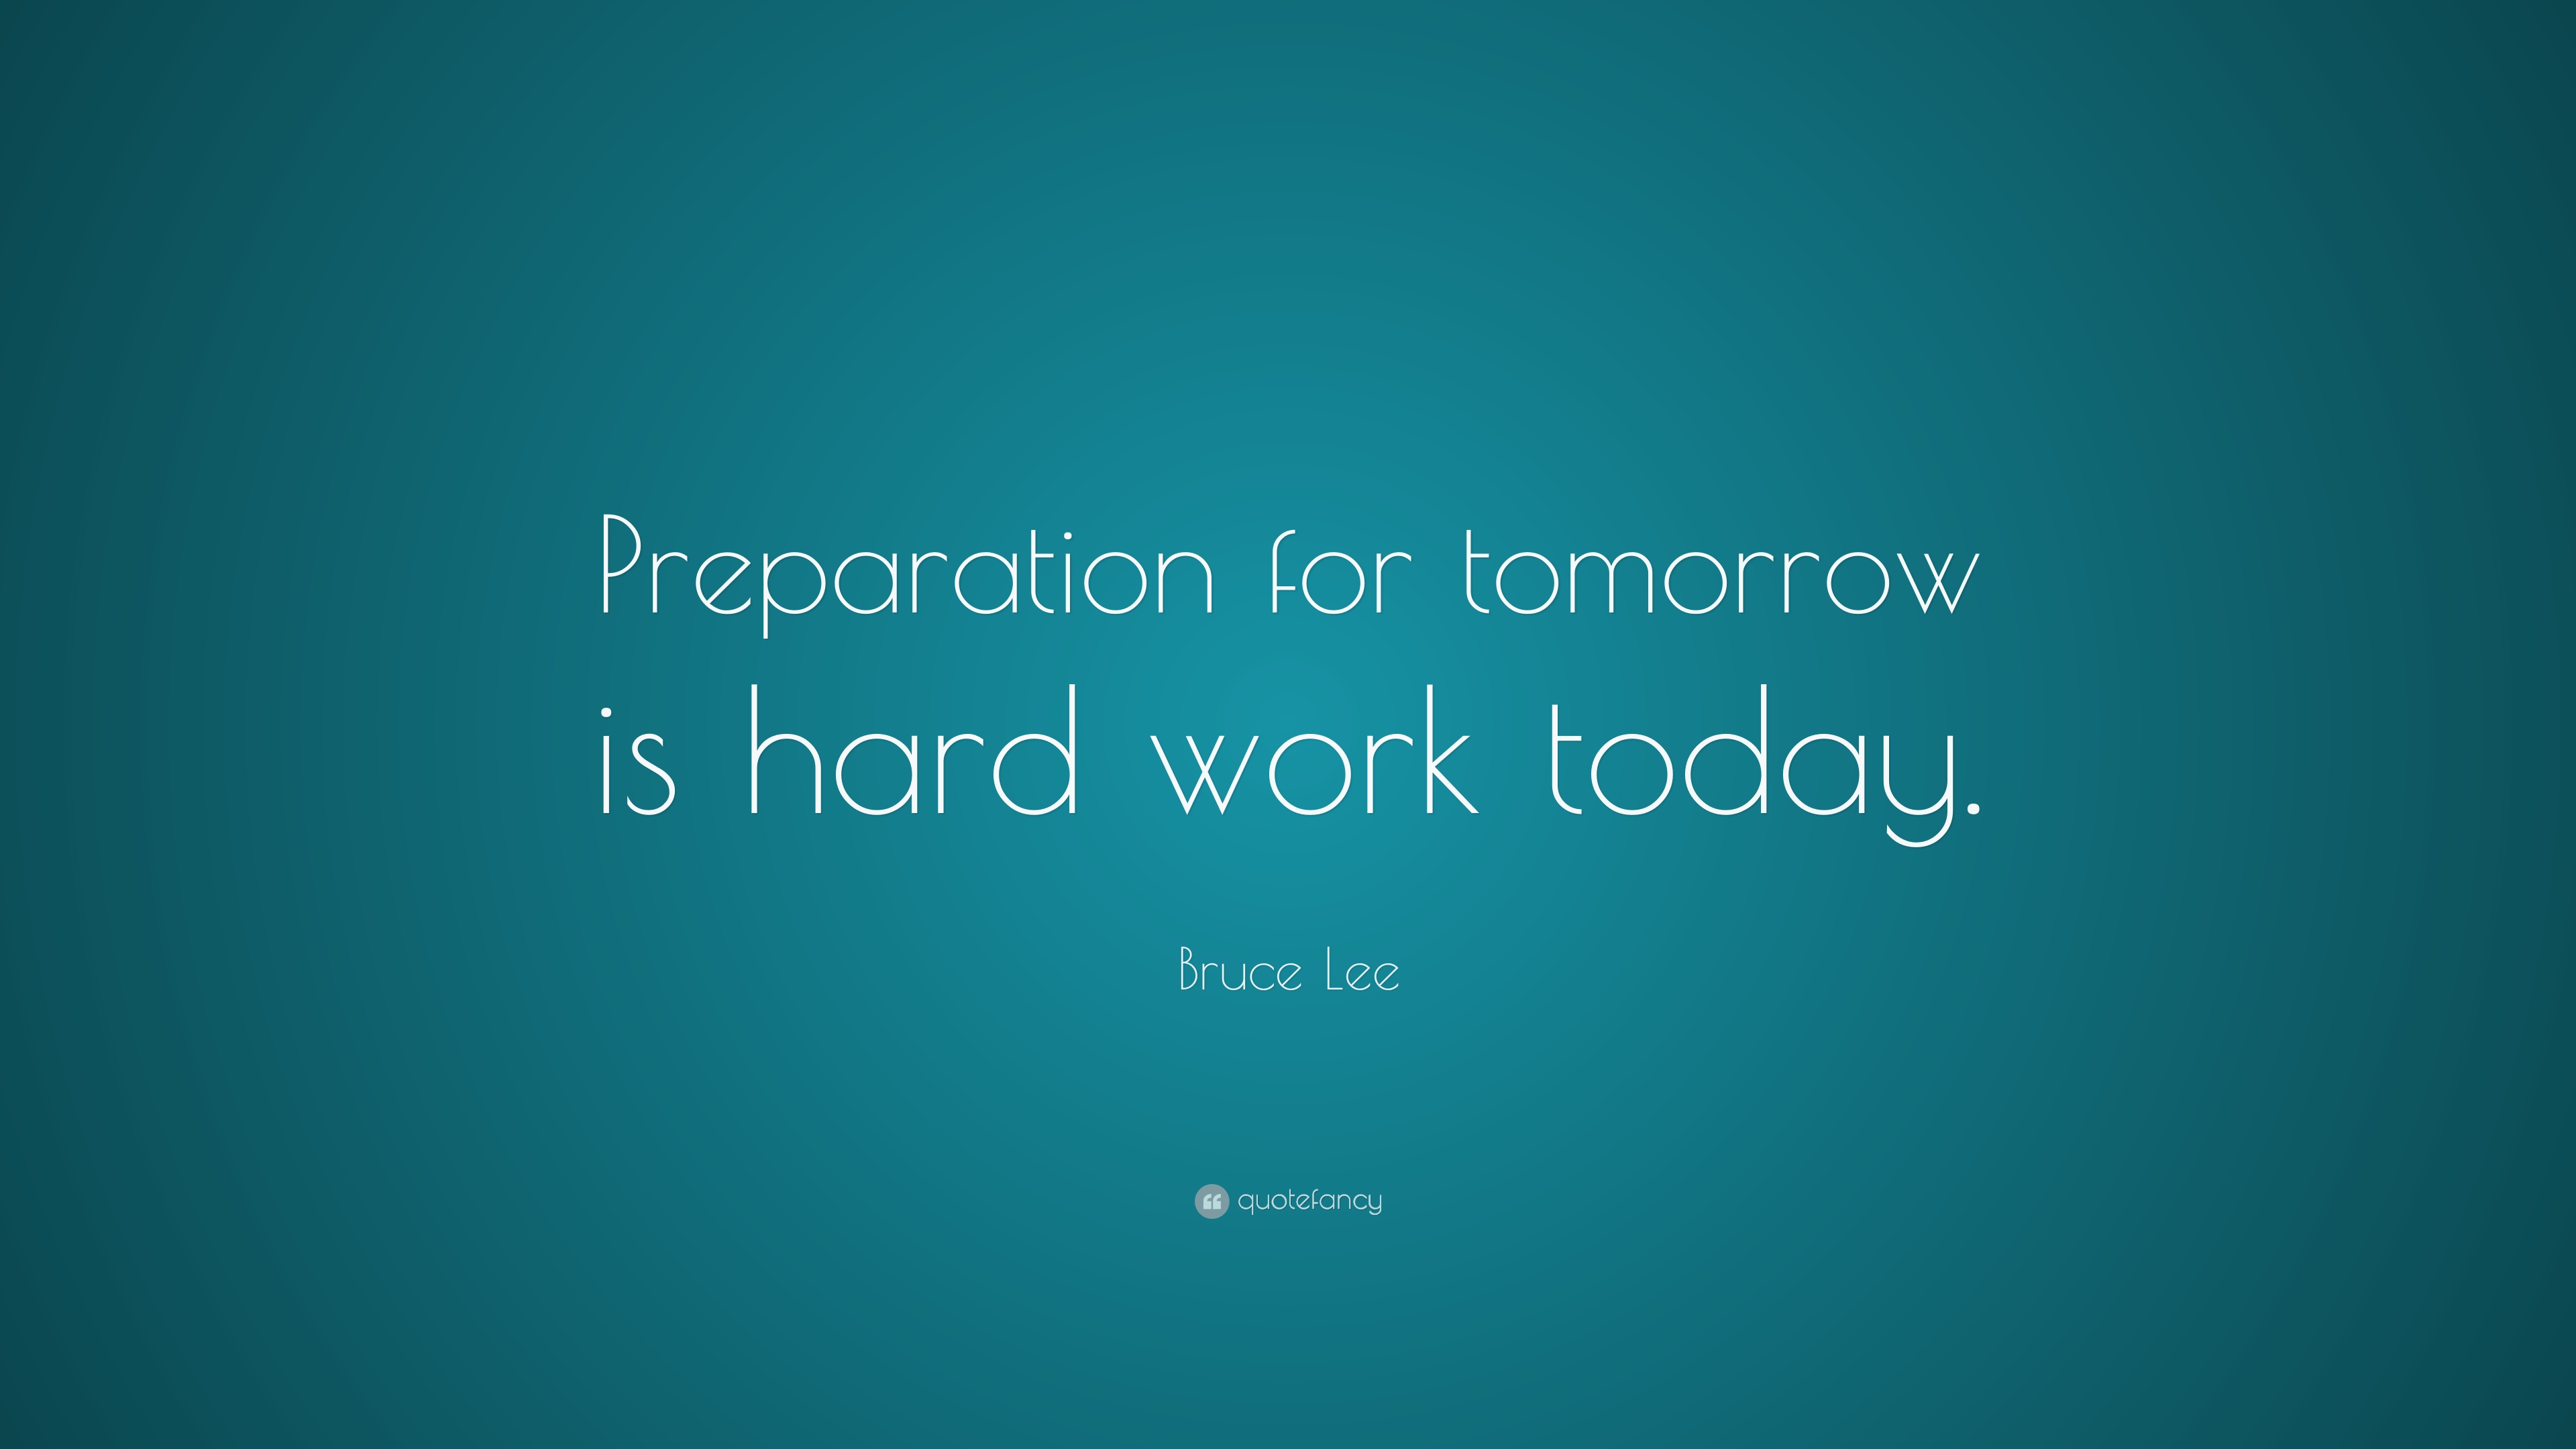 Bruce Lee Quote Preparation for tomorrow is hard work today